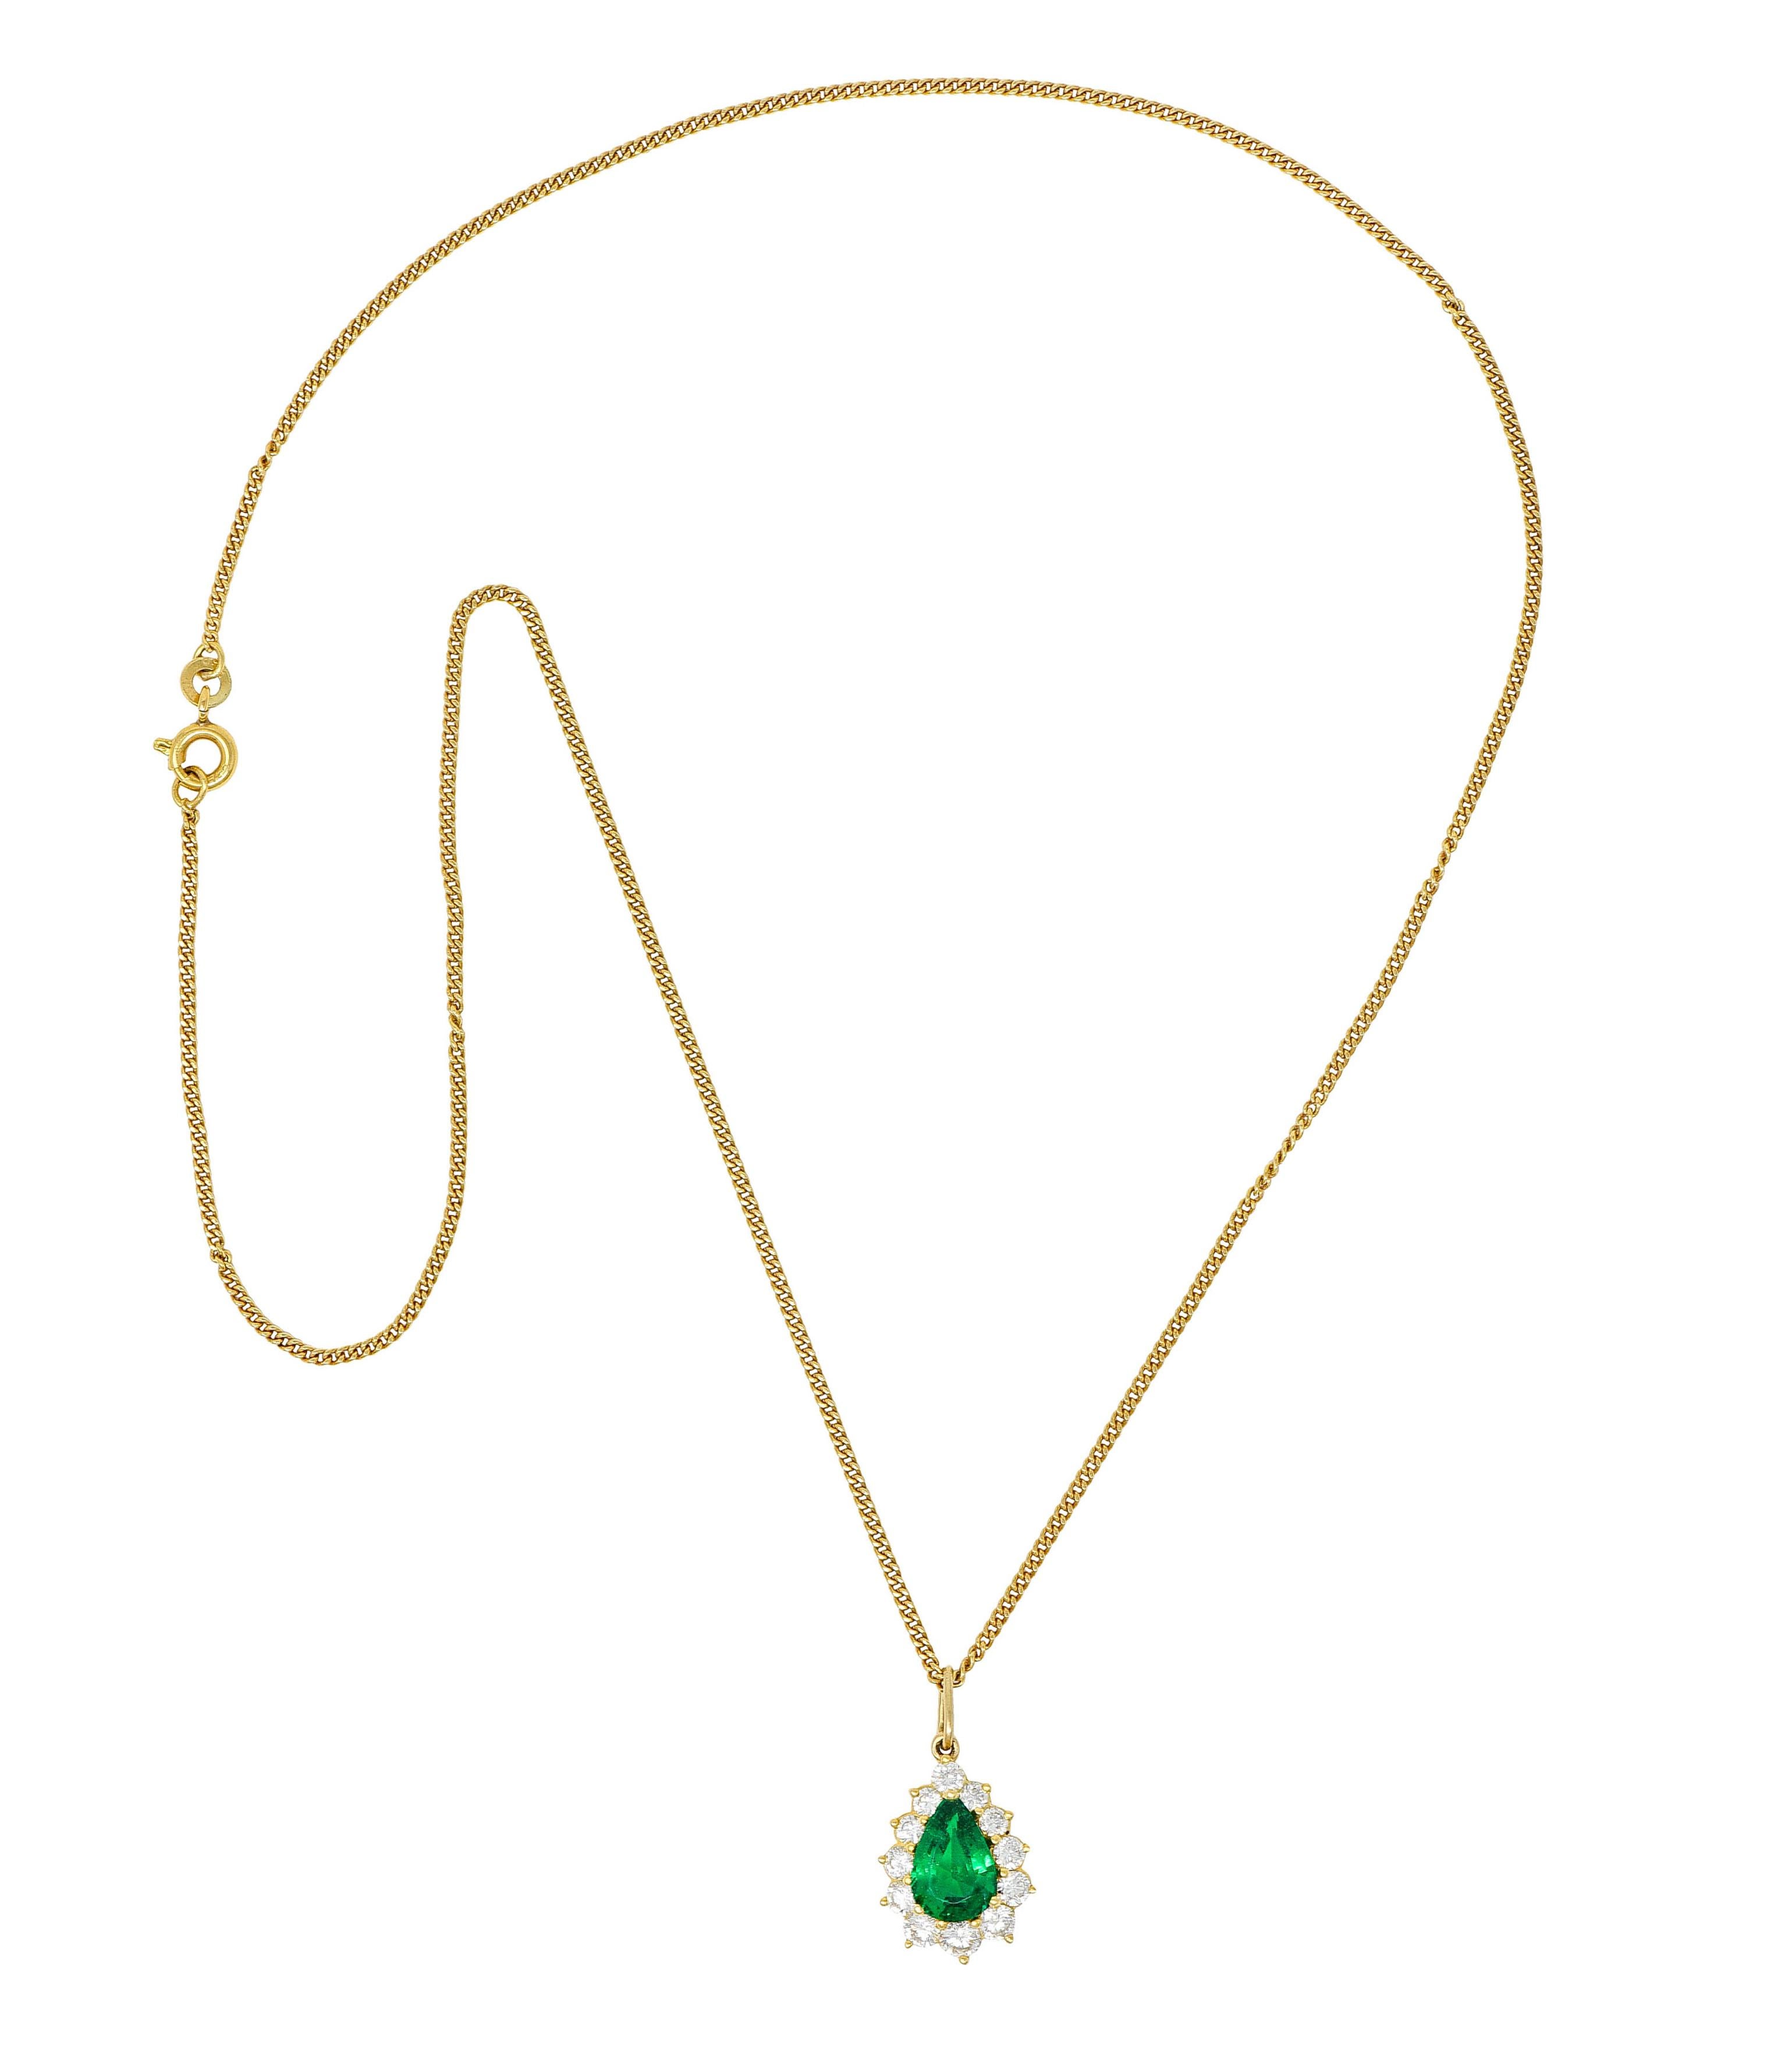 Curb chain necklace suspends a pear shaped cluster pendant

Featuring a pear cut emerald weighing approximately 2.15 carats

Bright green in color and semi-transparent with natural inclusions

Zambian in origin with minor traditional clarity